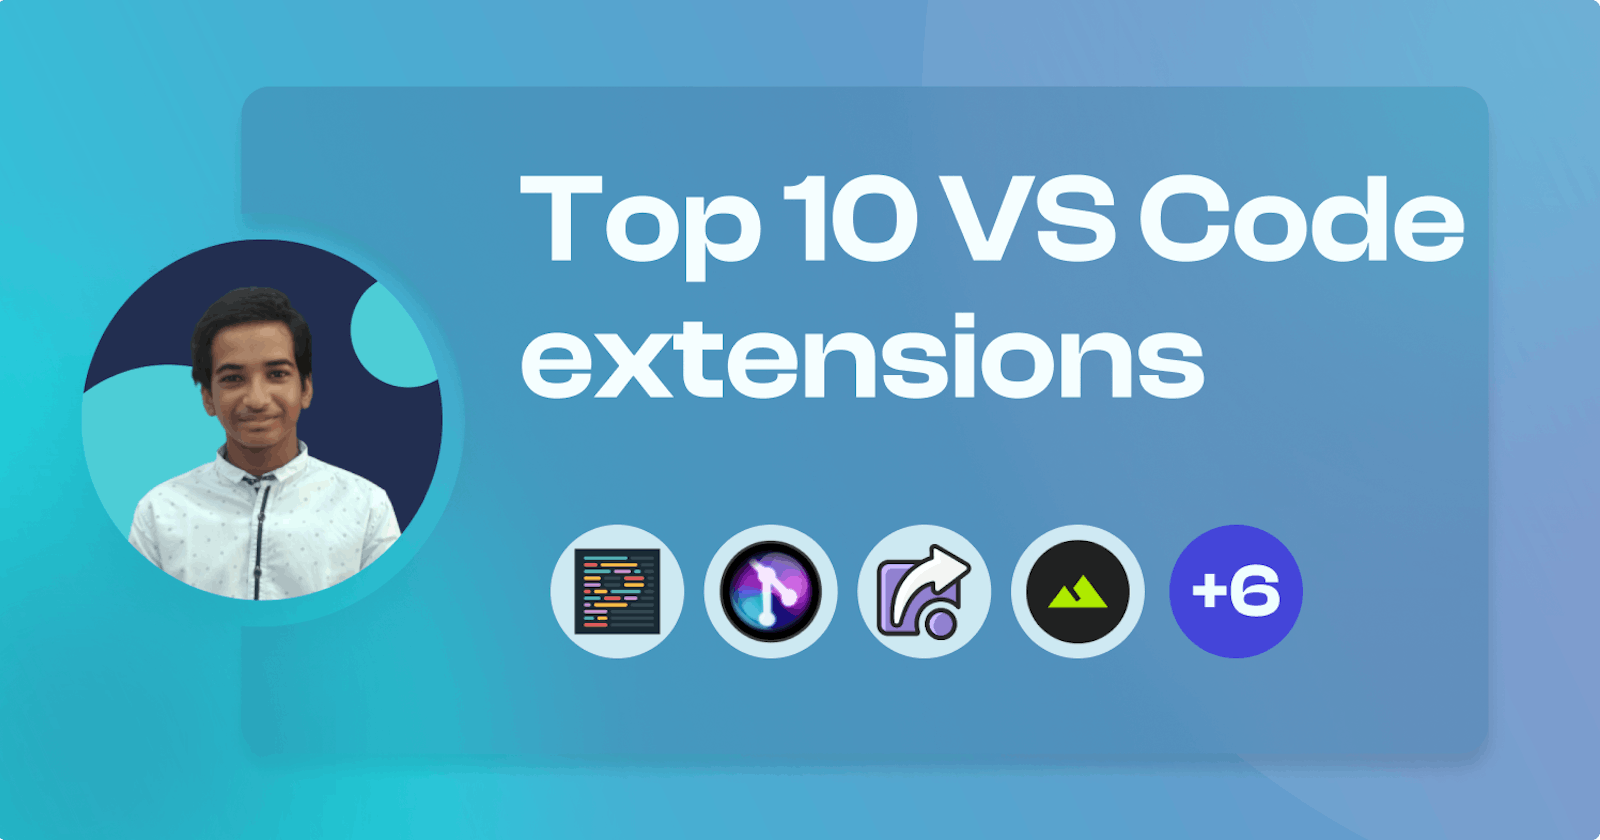 Top 10 VS Code extensions you need to install right now!